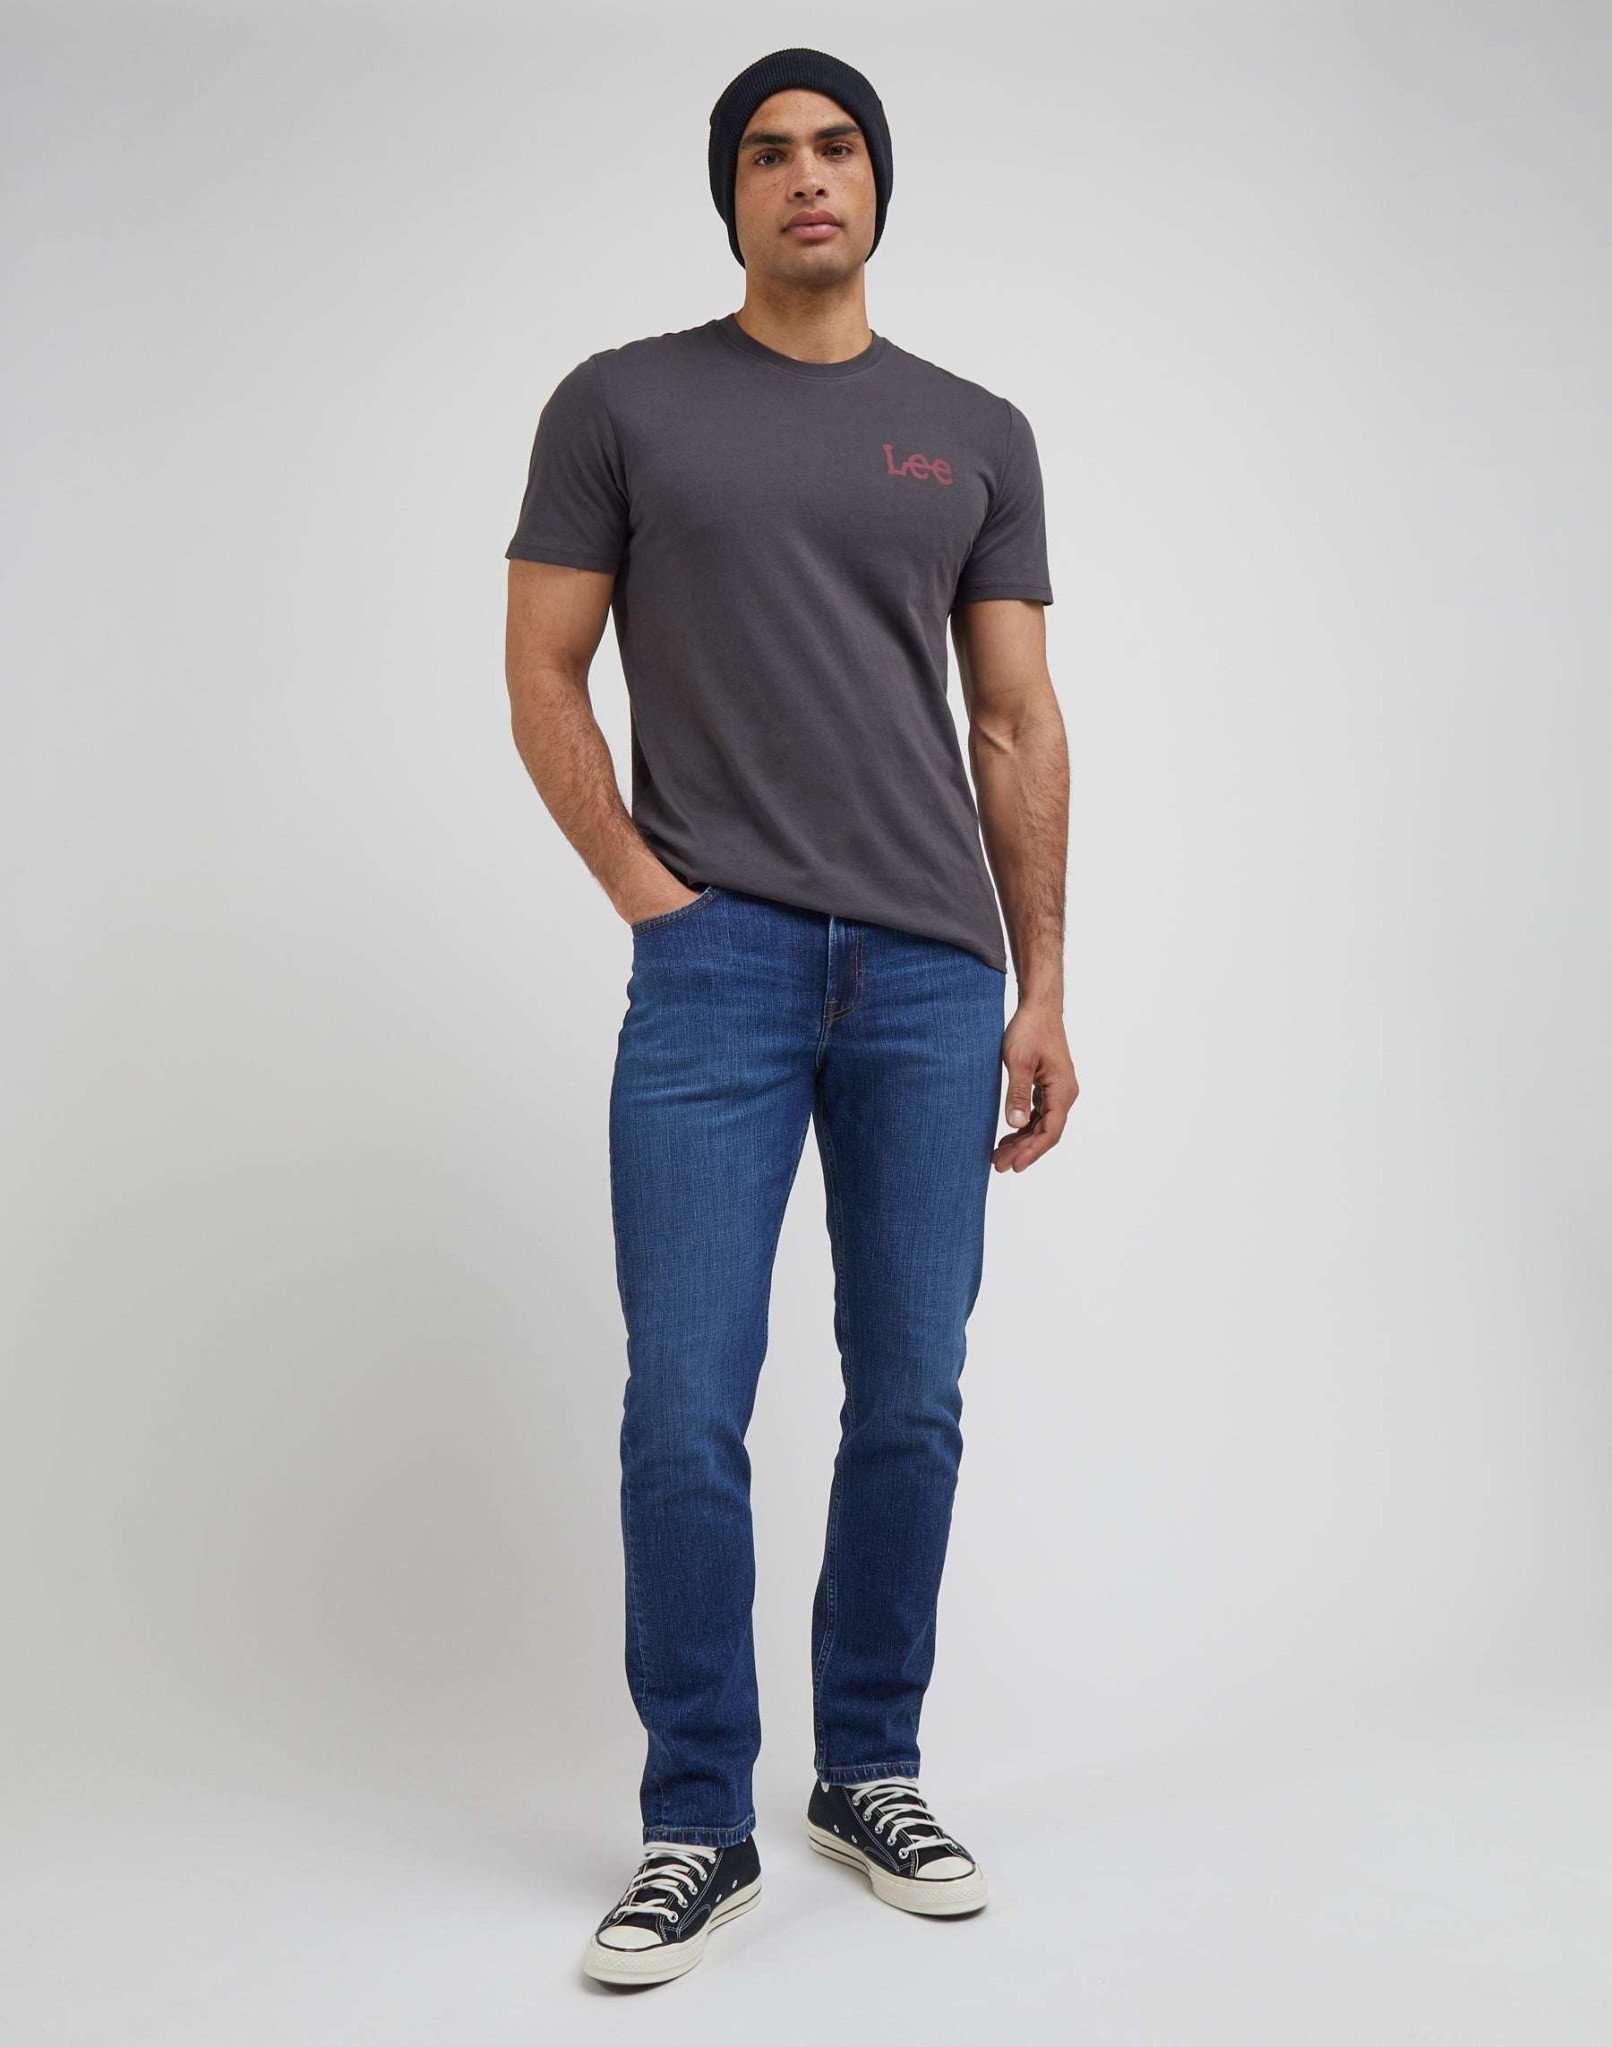 Medium Wobbly Lee Tee in Washed Black T-Shirts Lee   